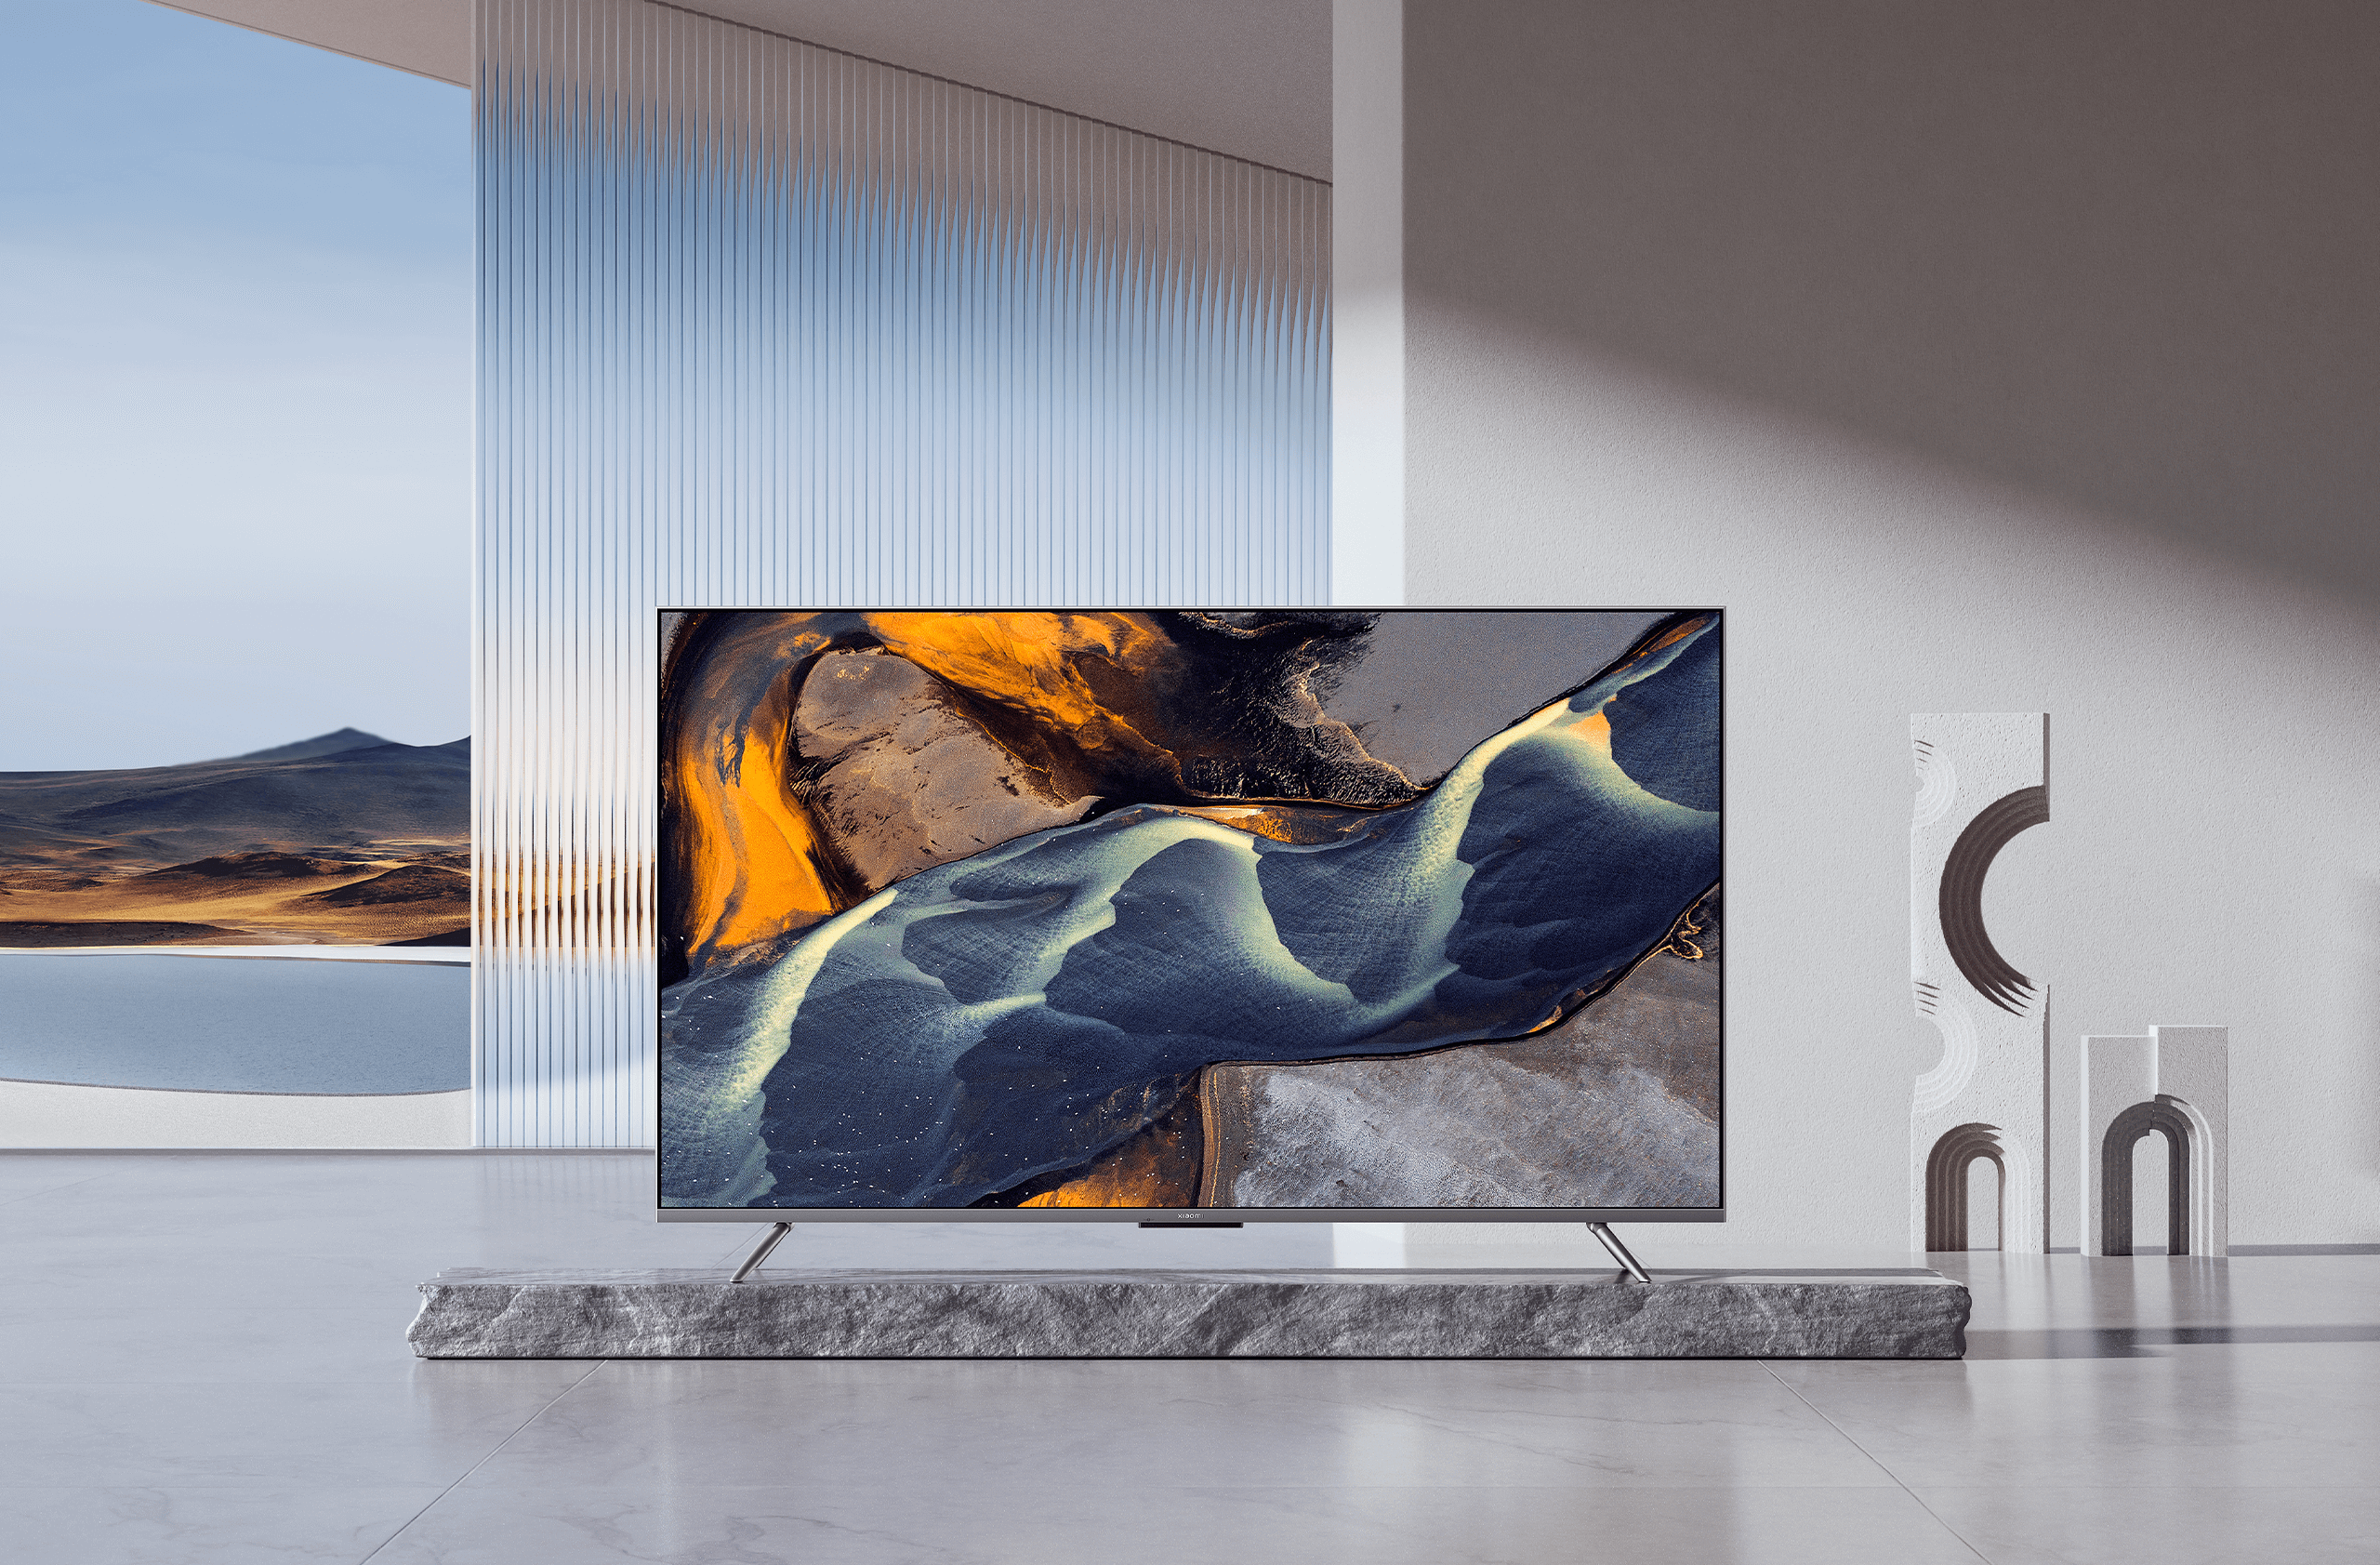 Xiaomi Tv Q2 65 Inch Ultra Hd 4K Qled Dolby Vision Iq And Dolby Atmos Aluminium Alloy Frame Google Tv Operating System 360 Degree Bluetooth Remote Control Xiaomi TV Q2 65 Grey